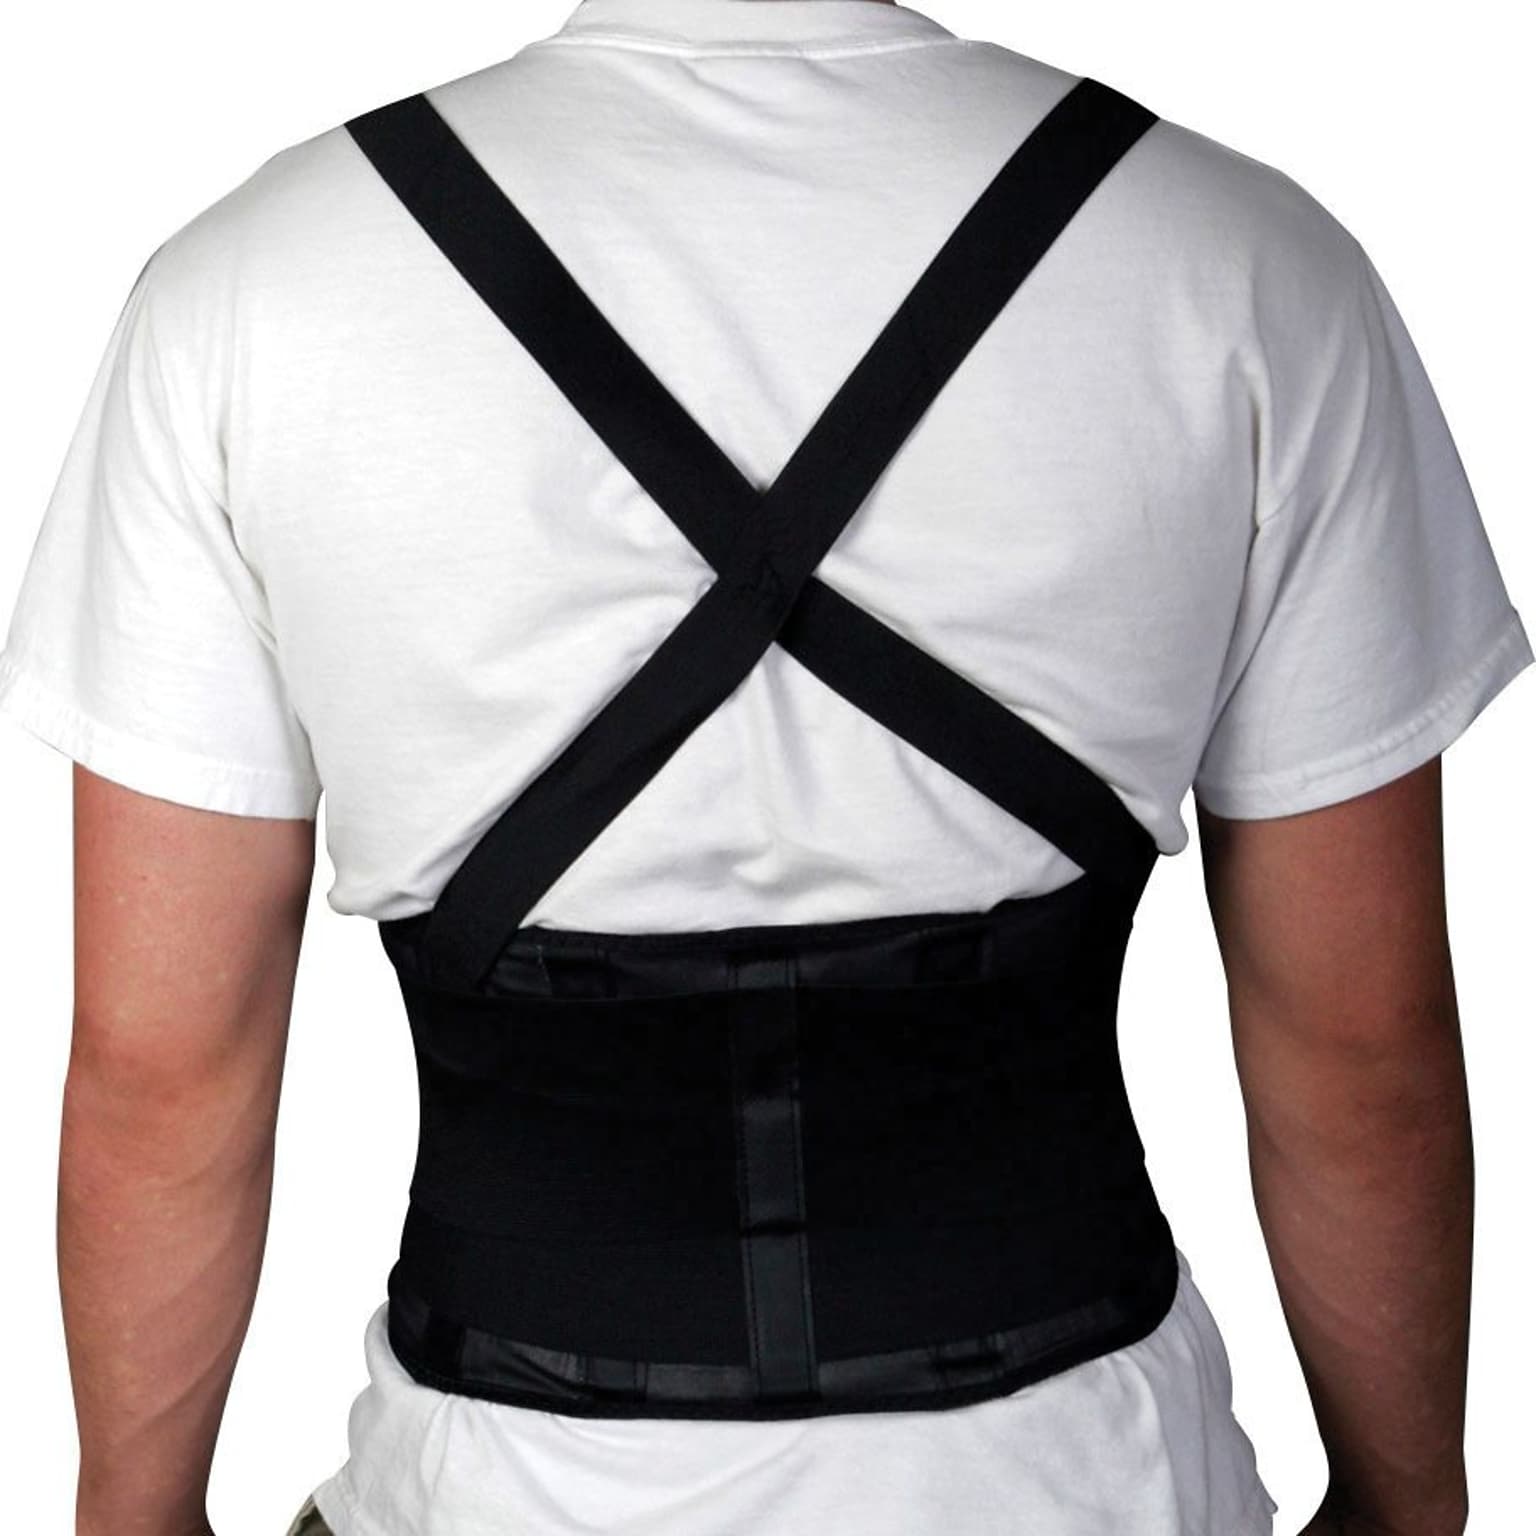 Medline Standard Back Support with Suspenders, Black, Small, 25 - 30 L x 10 H, Each